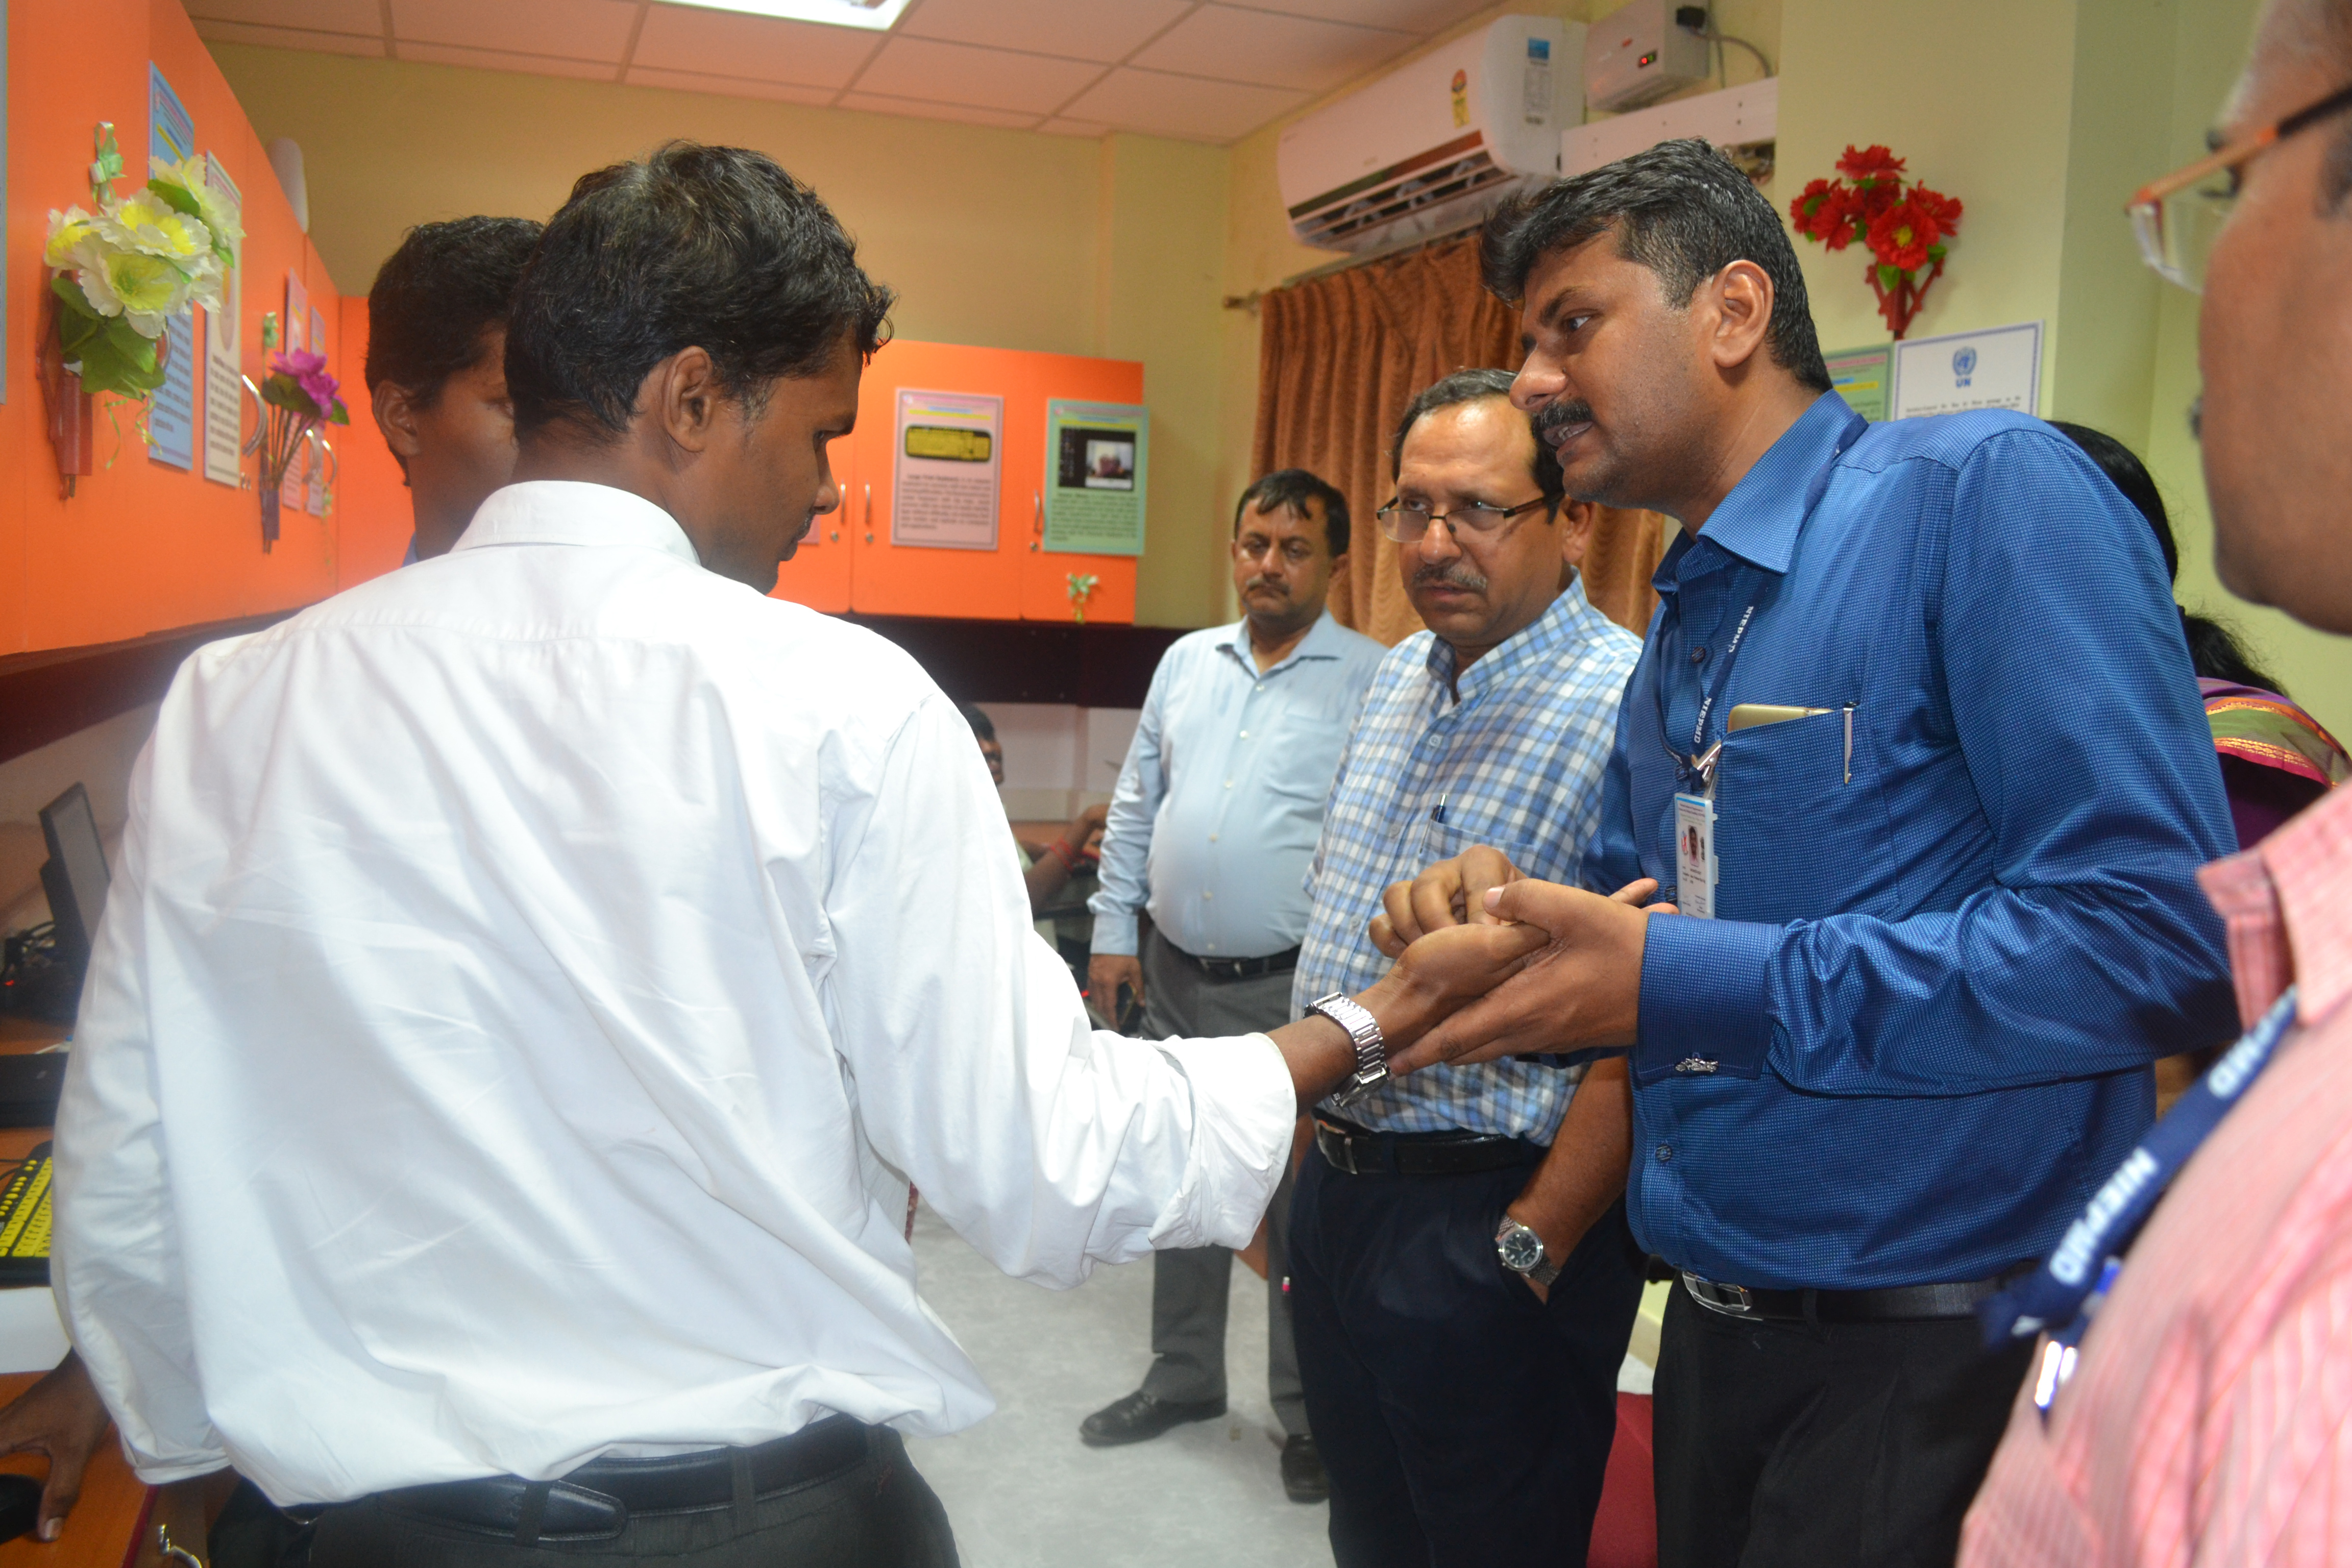 Interaction with one of the Pw.Ds Student by Secretary.